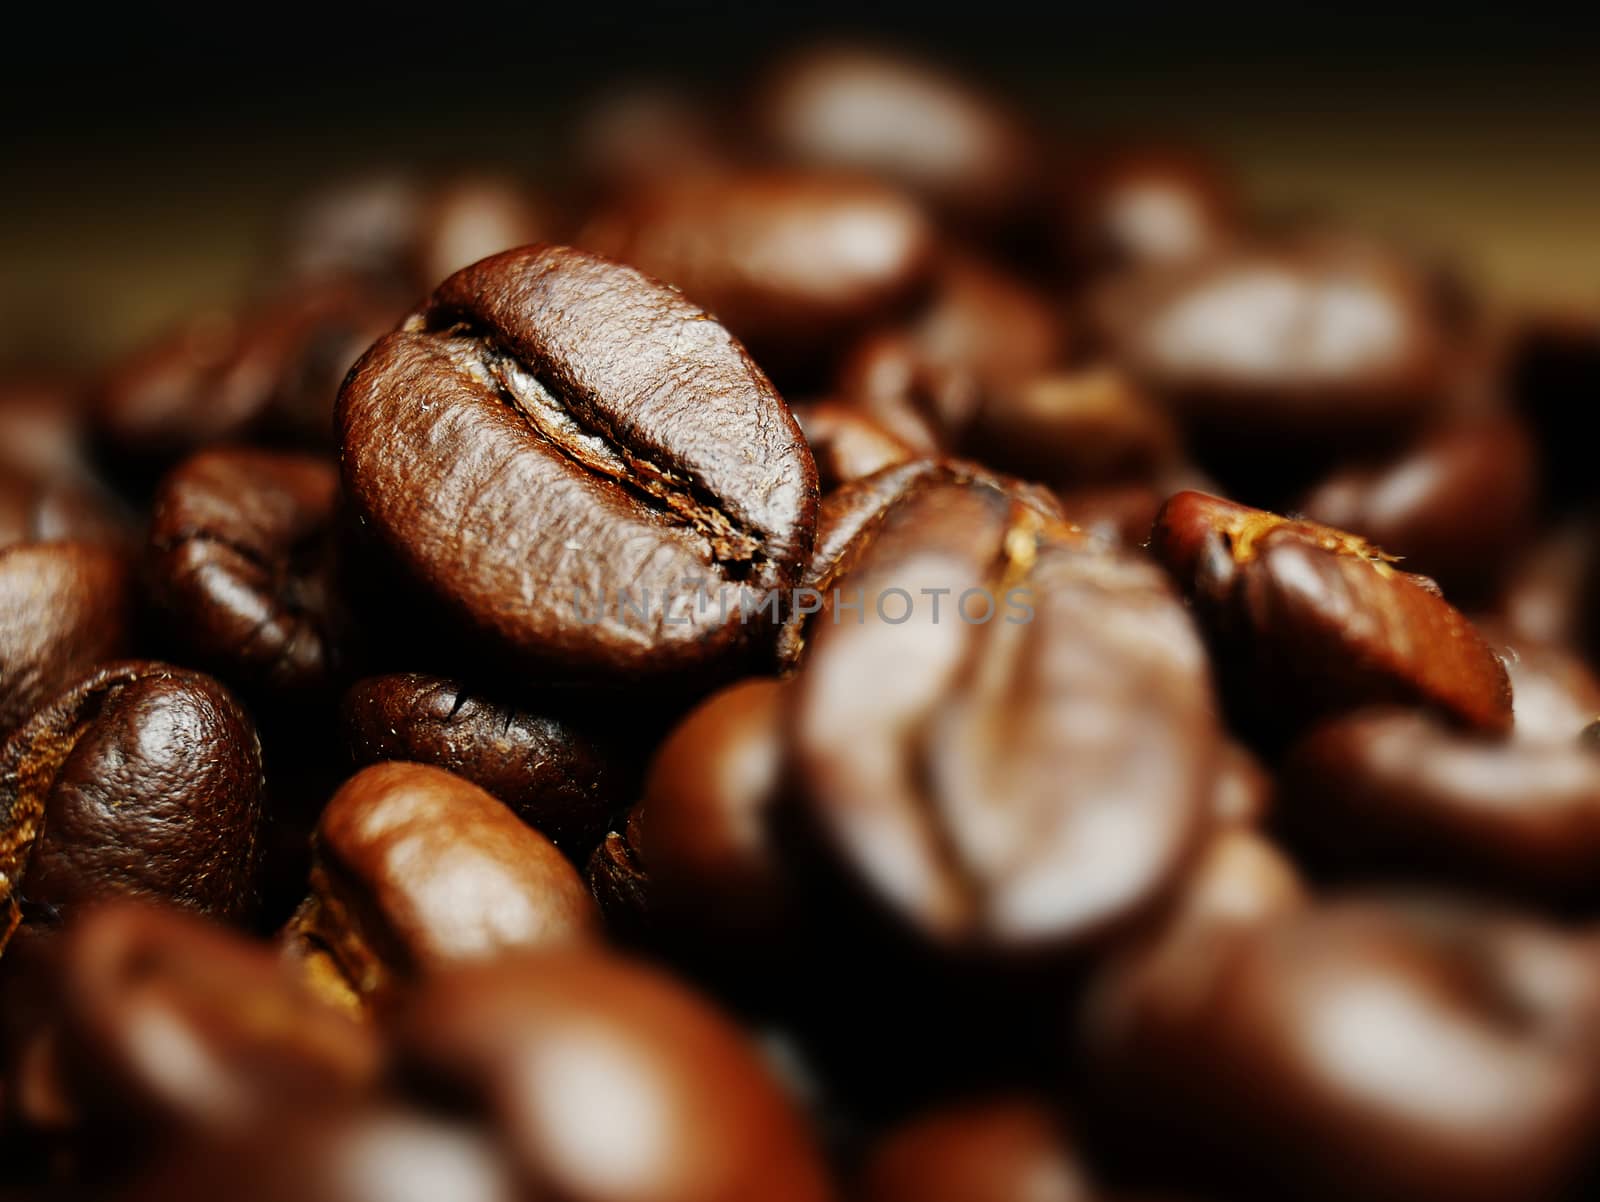 Close-up photo roasted coffee beans with focus on one seed.